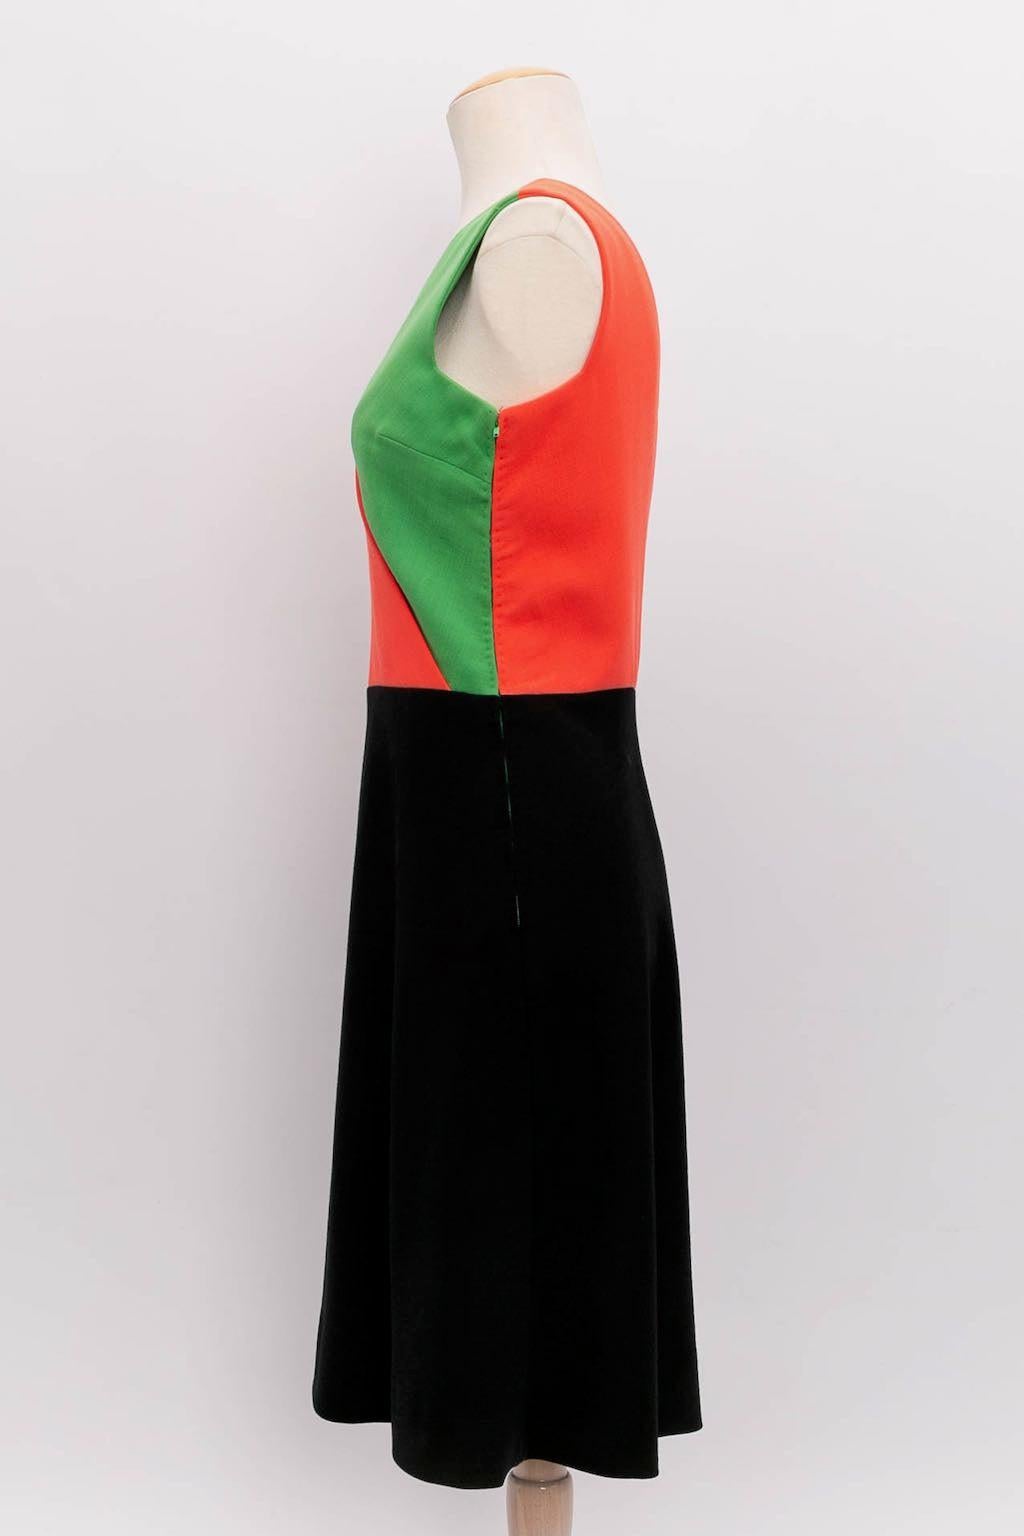 Pierre Cardin - Wool dress Closing with a side zip. No composition or size tag, it fits a size 38FR.

Additional information: 
Dimensions: Bust 45 cm (17.71